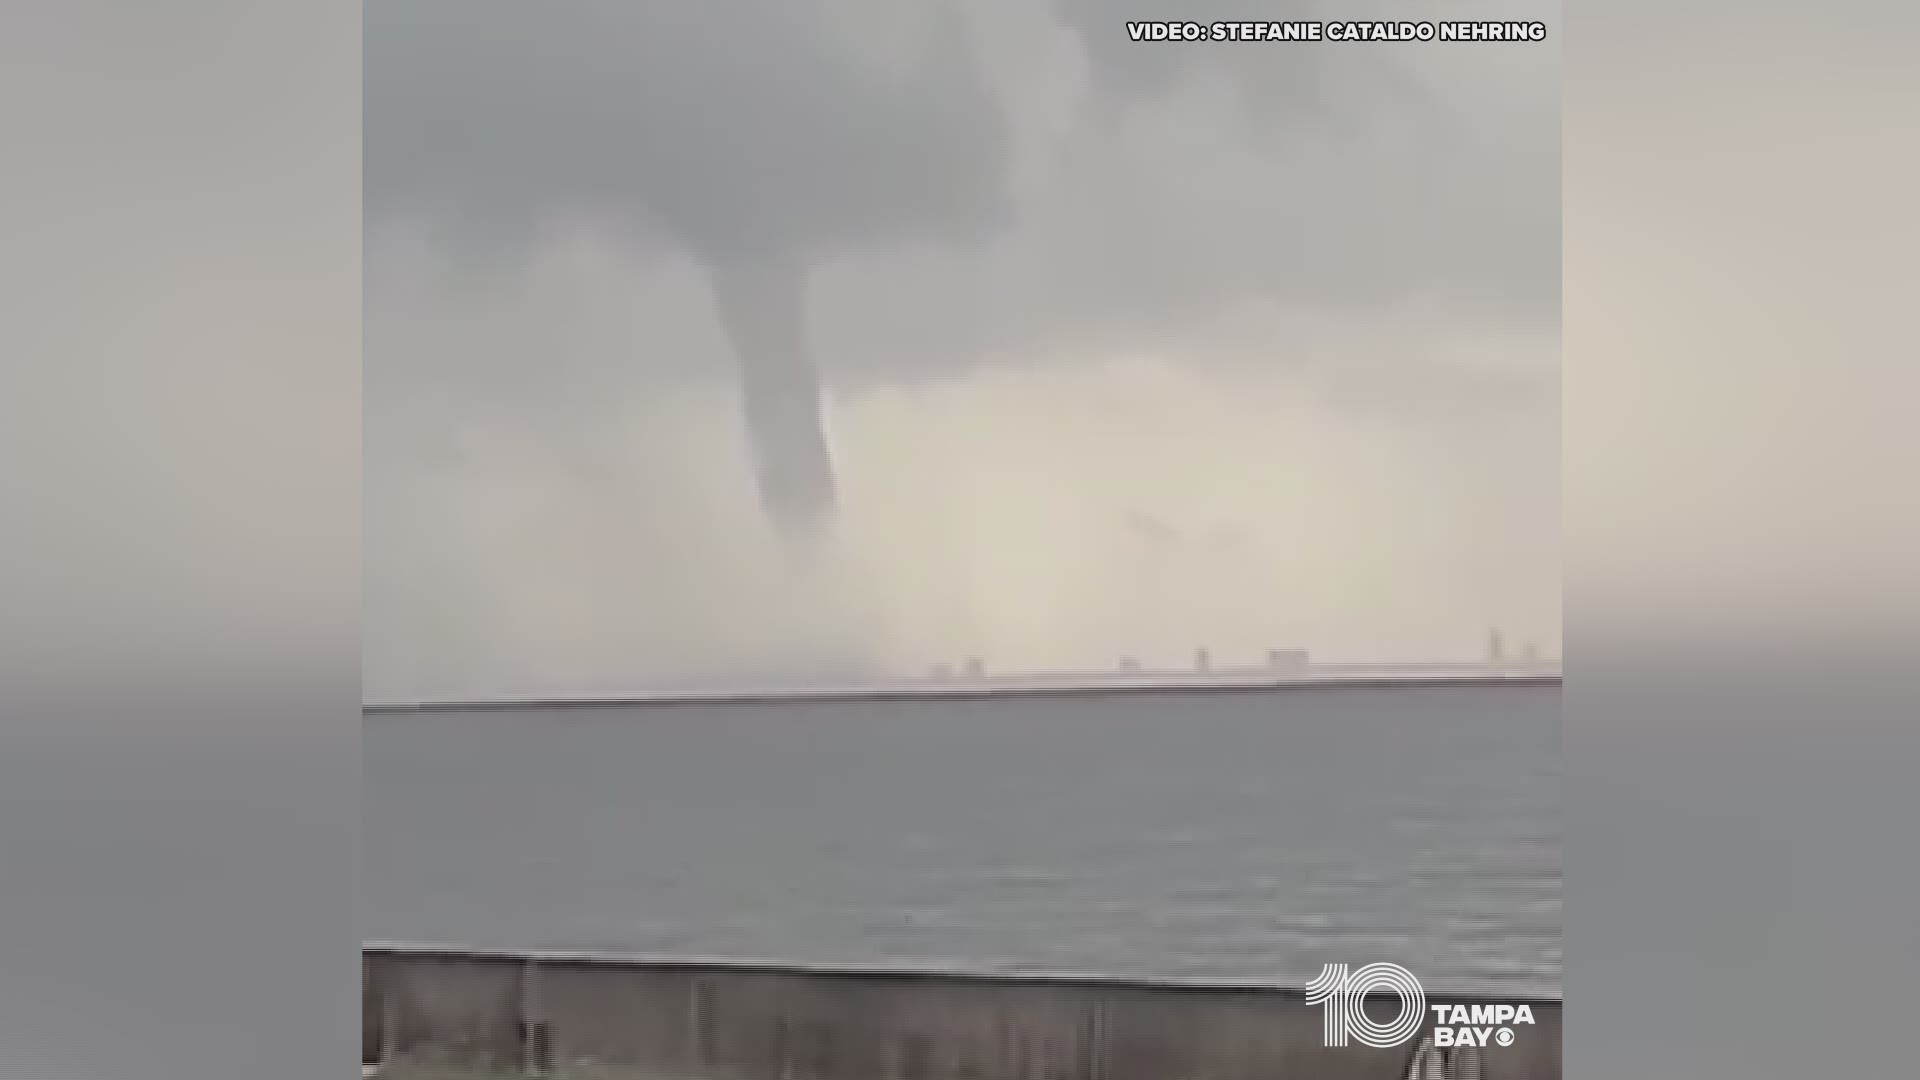 Video shows the waterspout over Tampa Bay, as seen Wednesday morning from the Howard Frankland Bridge.